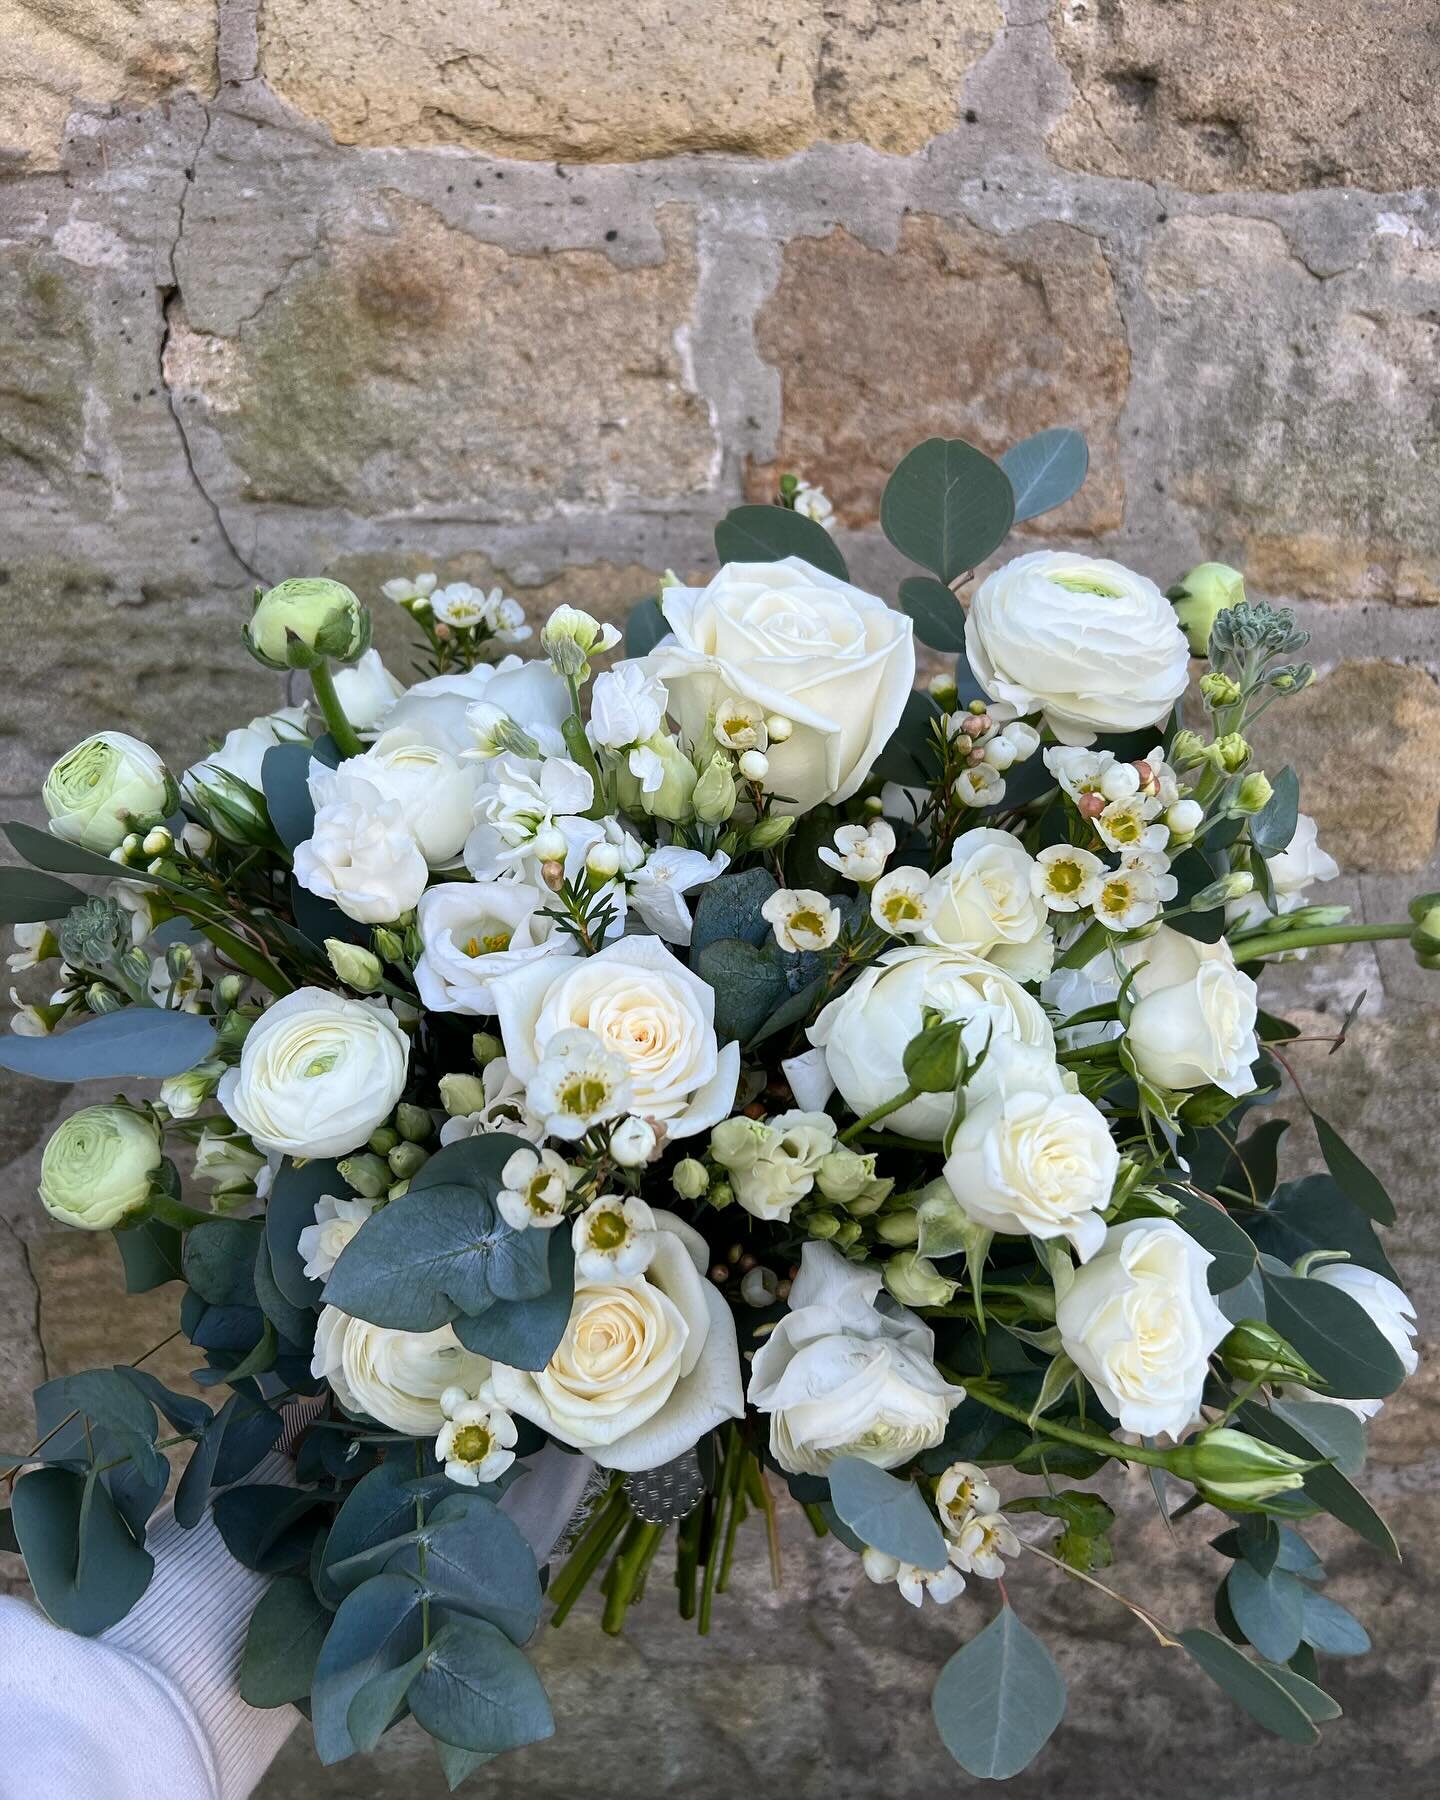 Beautiful crisp whites and greens for Abbie and Ross who married at @the_parlour_at_blagdon 🤍🌿
Filled with ranunculus, roses, plenty of eucalyptus and more, classic and elegant with plenty of texture.
Abbie was my first apprentice years ago when I 